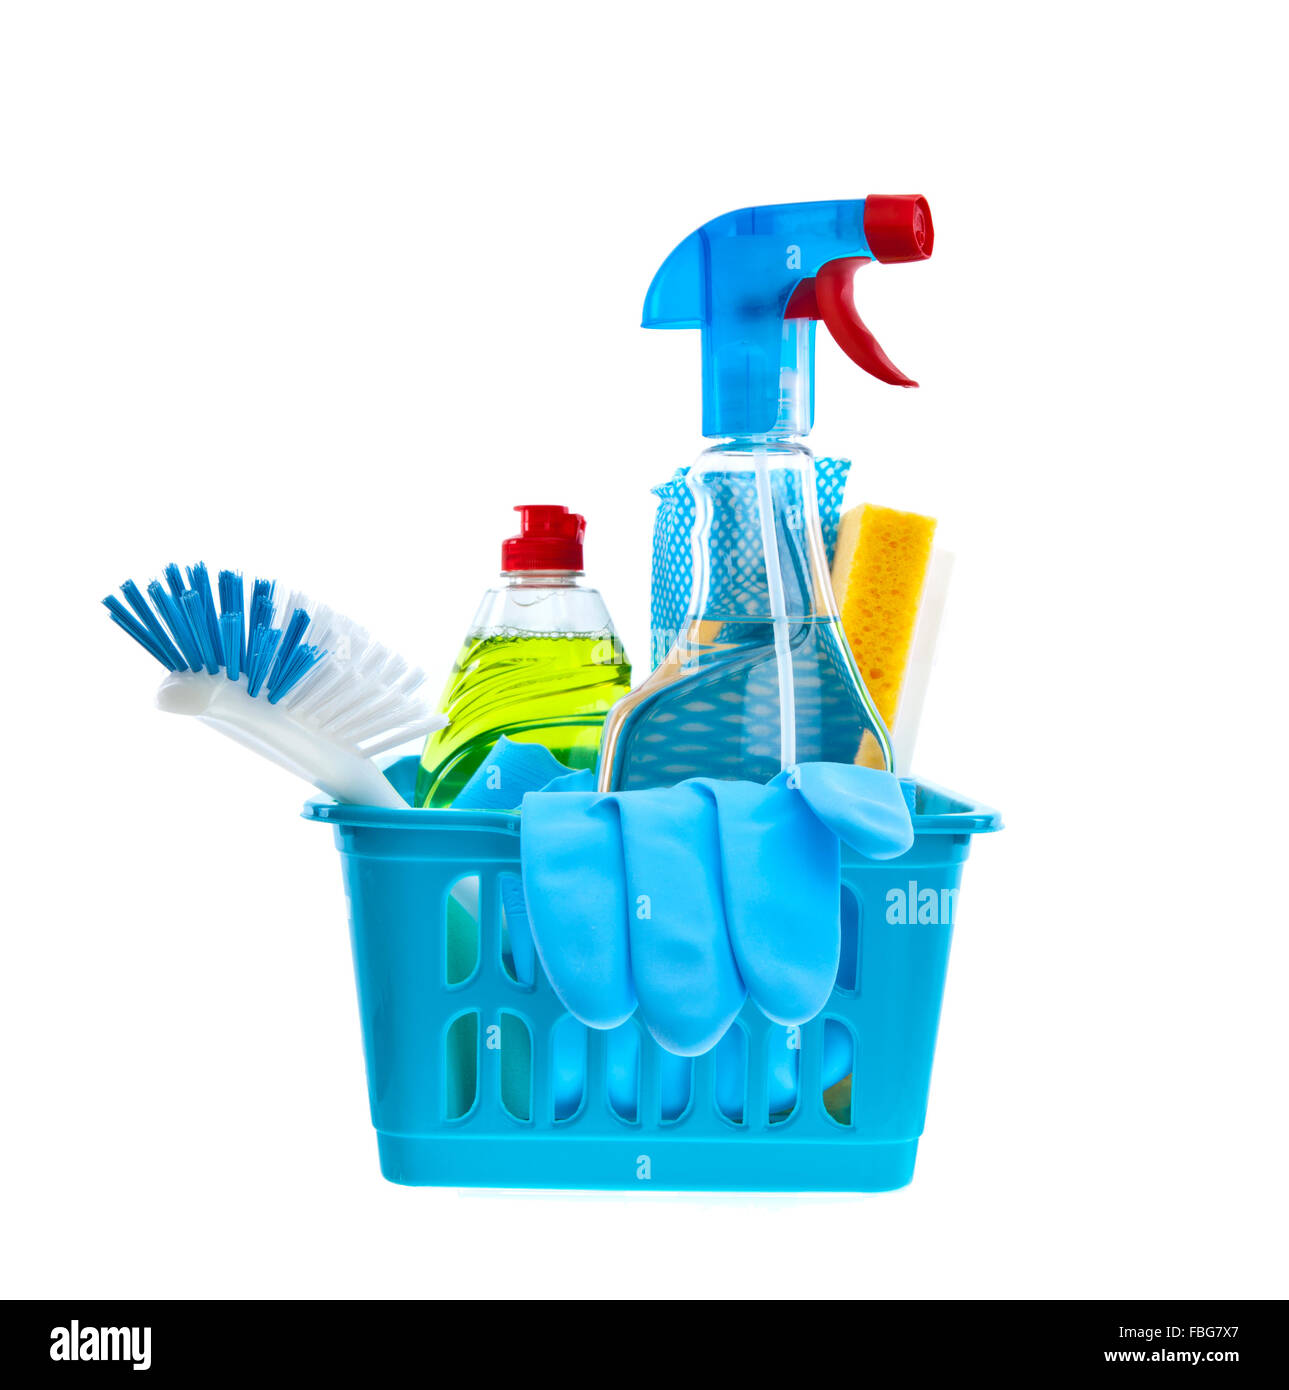 https://c8.alamy.com/comp/FBG7X7/assorted-cleaning-products-on-white-background-FBG7X7.jpg